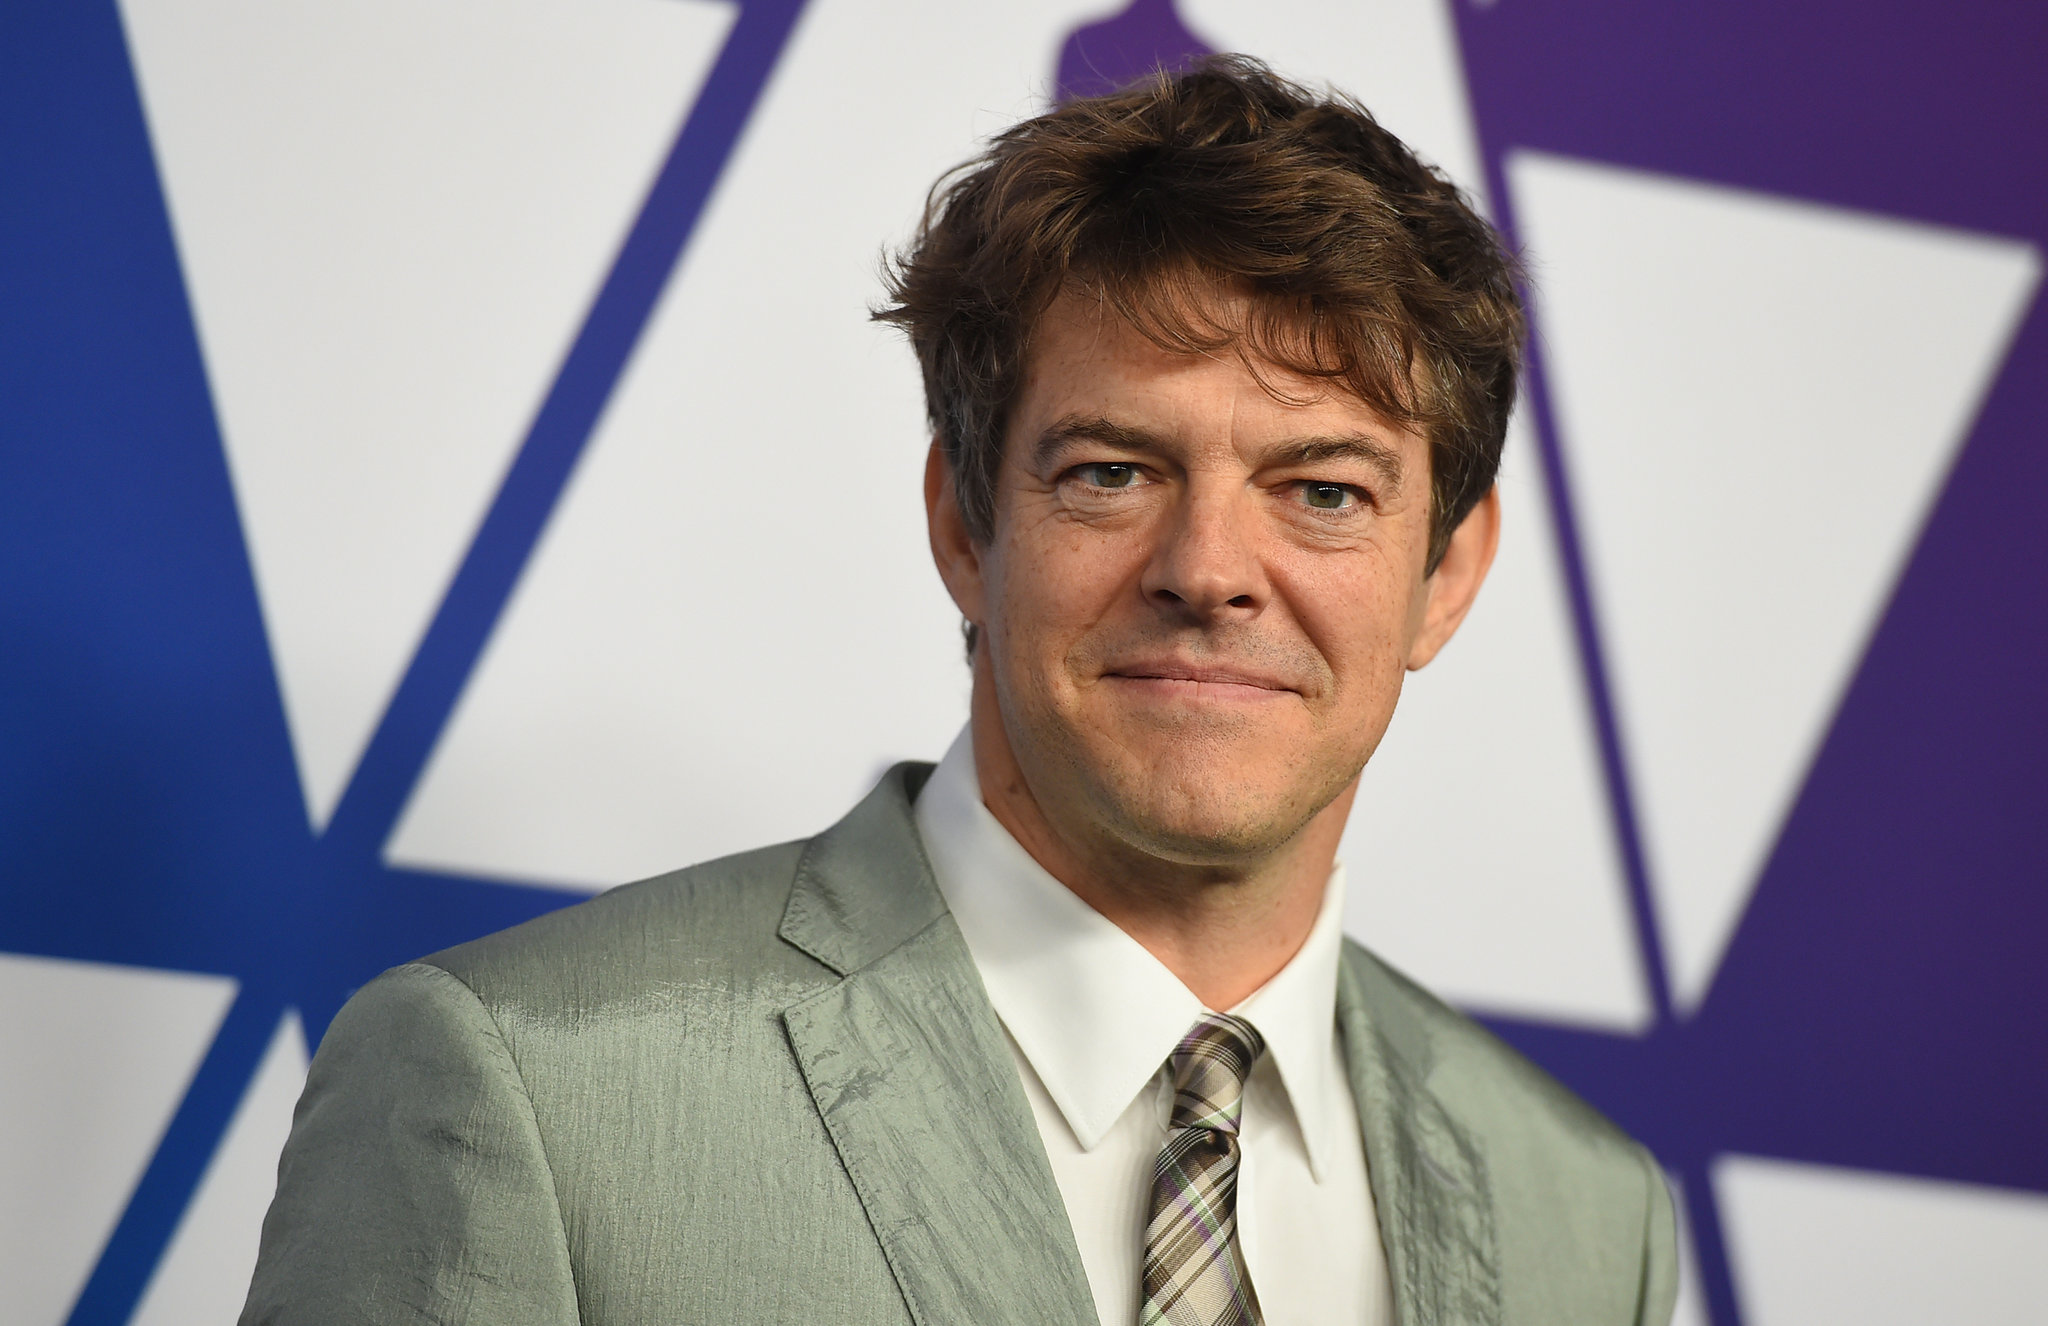 Jason Blum Was Mocked for Making Five Nights at Freddy's